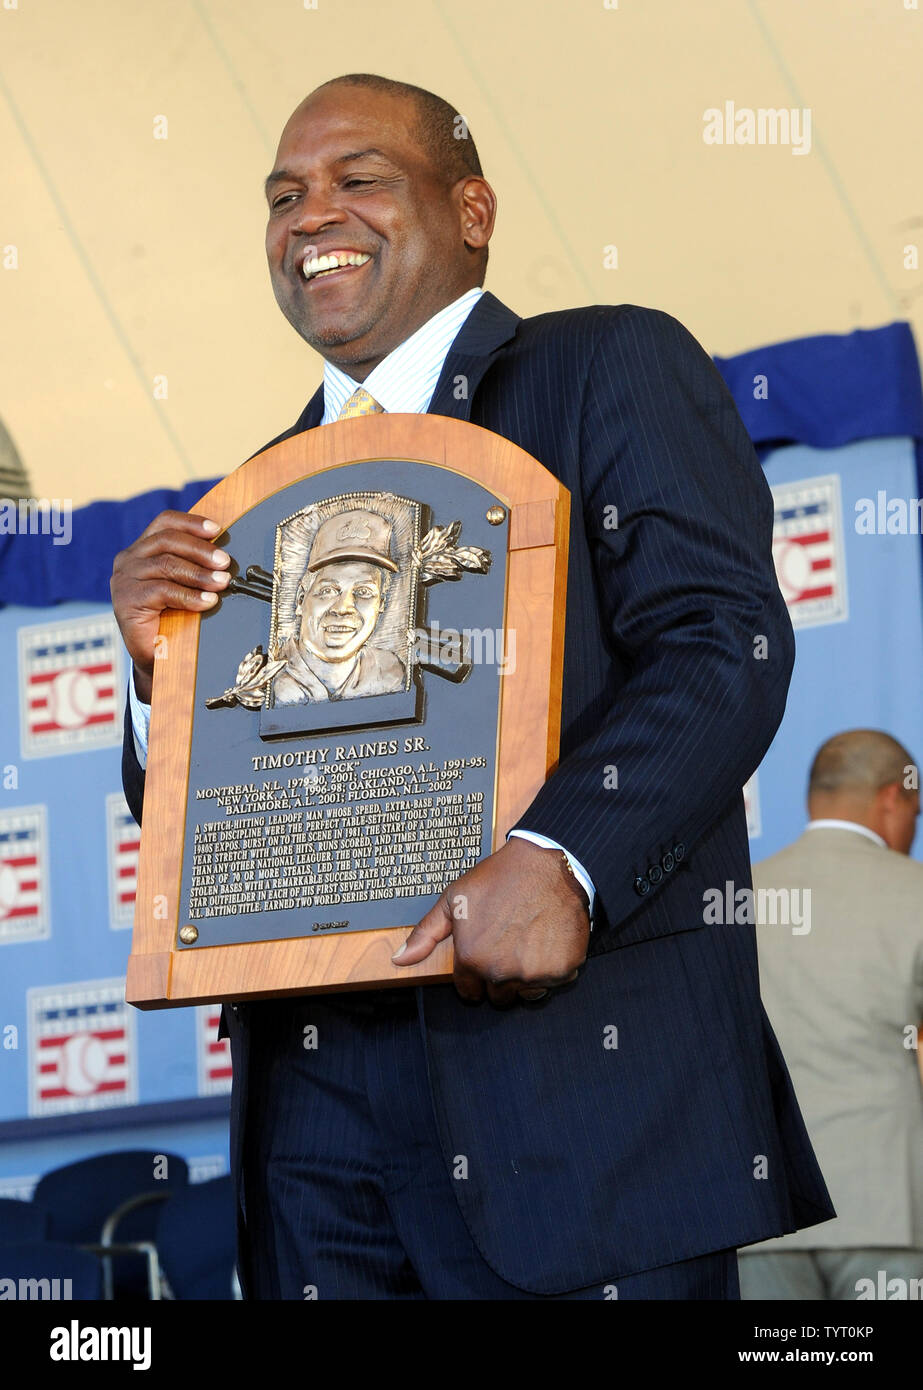 Tim Raines' Hall of Fame Day - Cooperstown Cred